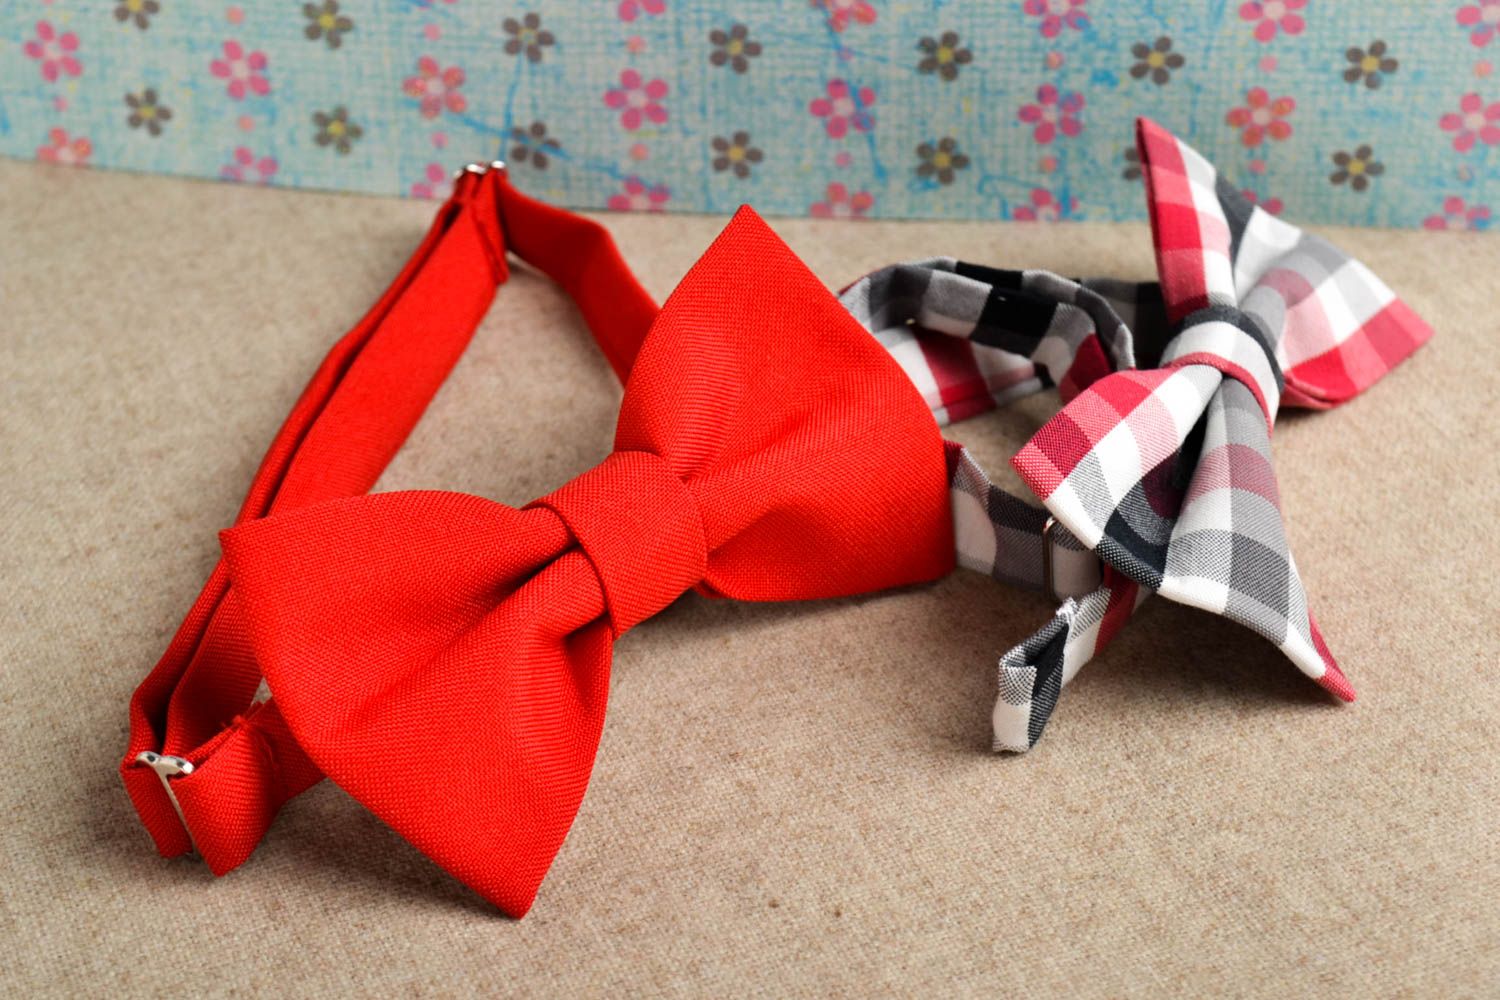 Handmade textile bow tie fabric bow tie accessories for men present for friend photo 1